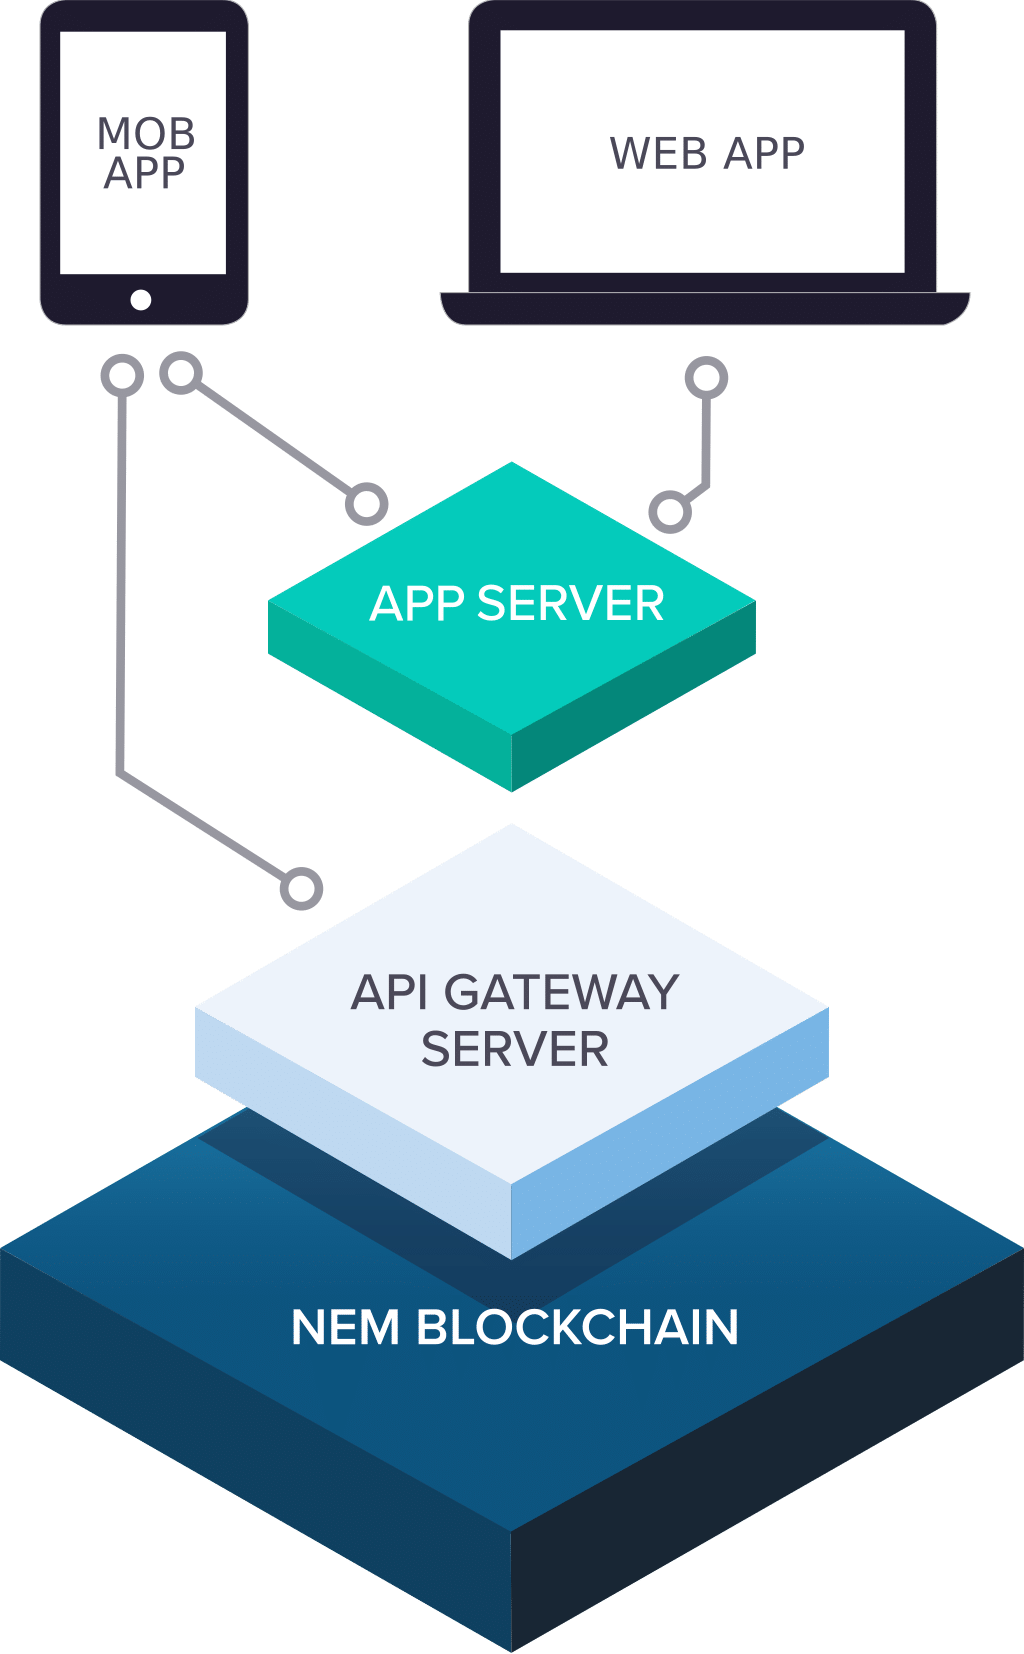 Using the NEM network in addition to an existing server